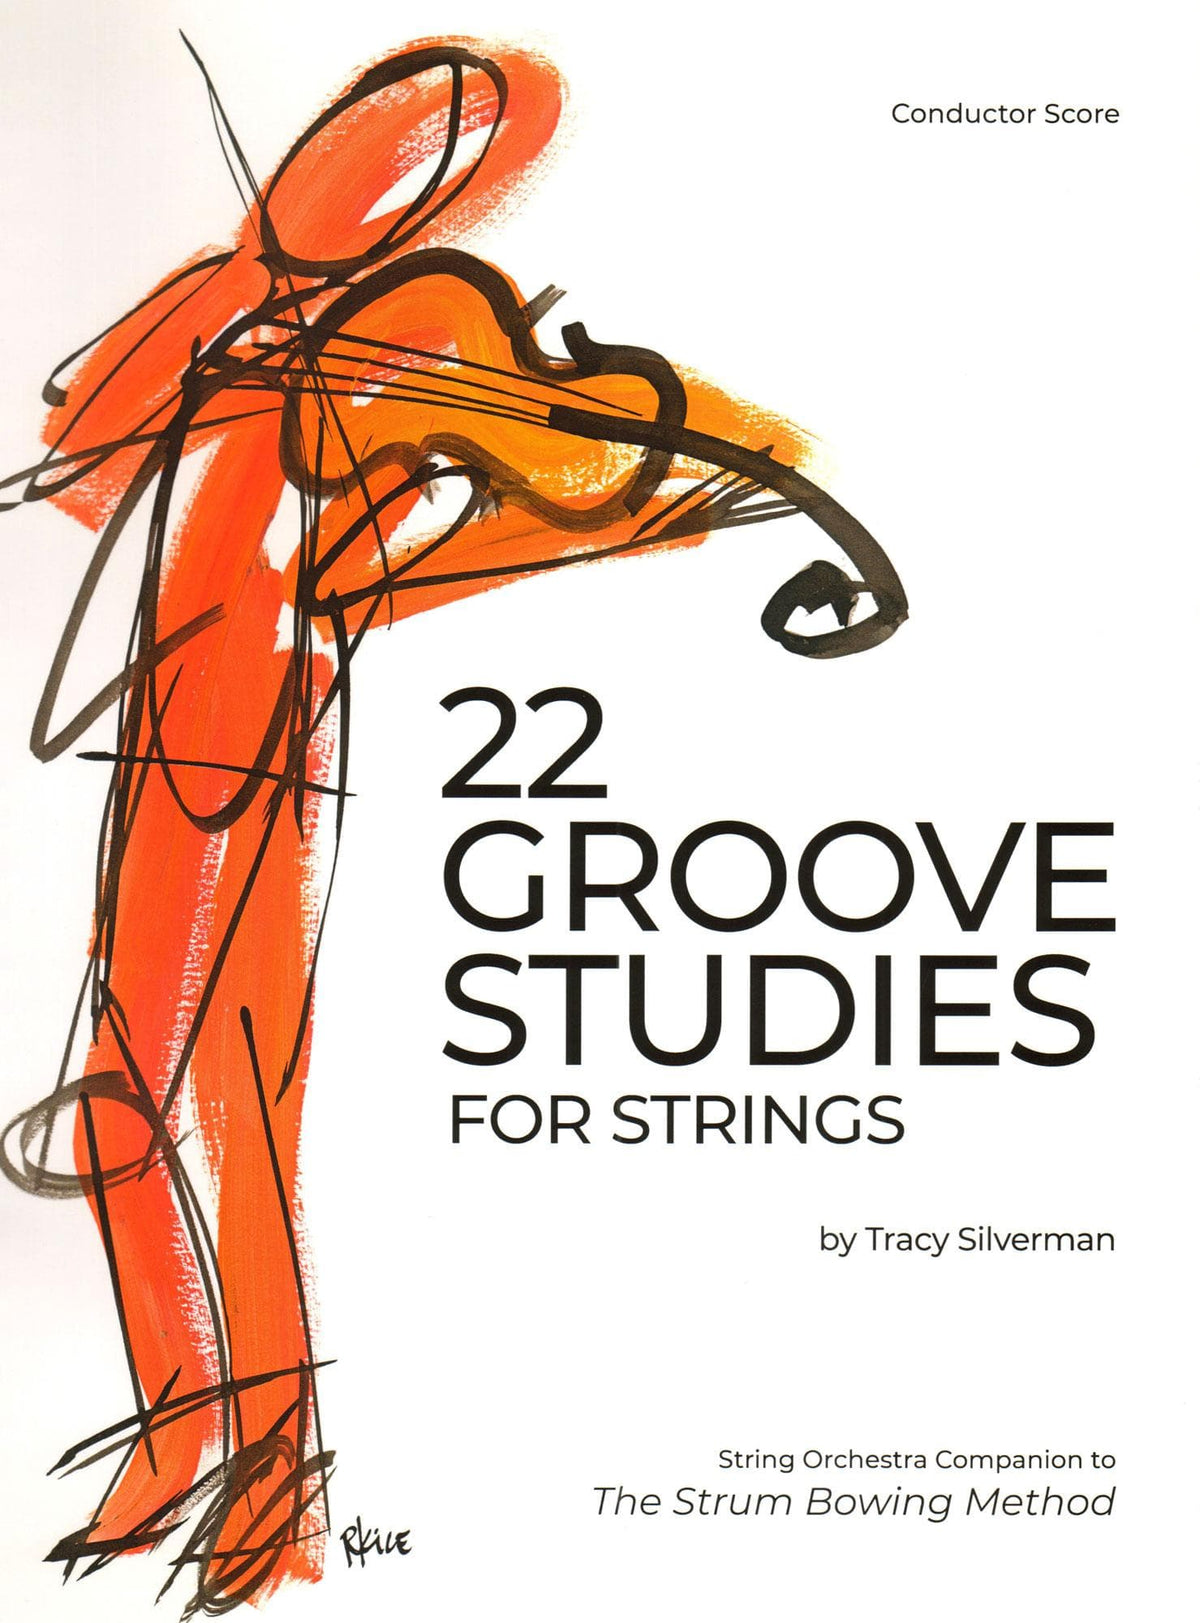 22 Groove Studies for Strings by Tracy Silverman, Companion to The Strum Bowing Method